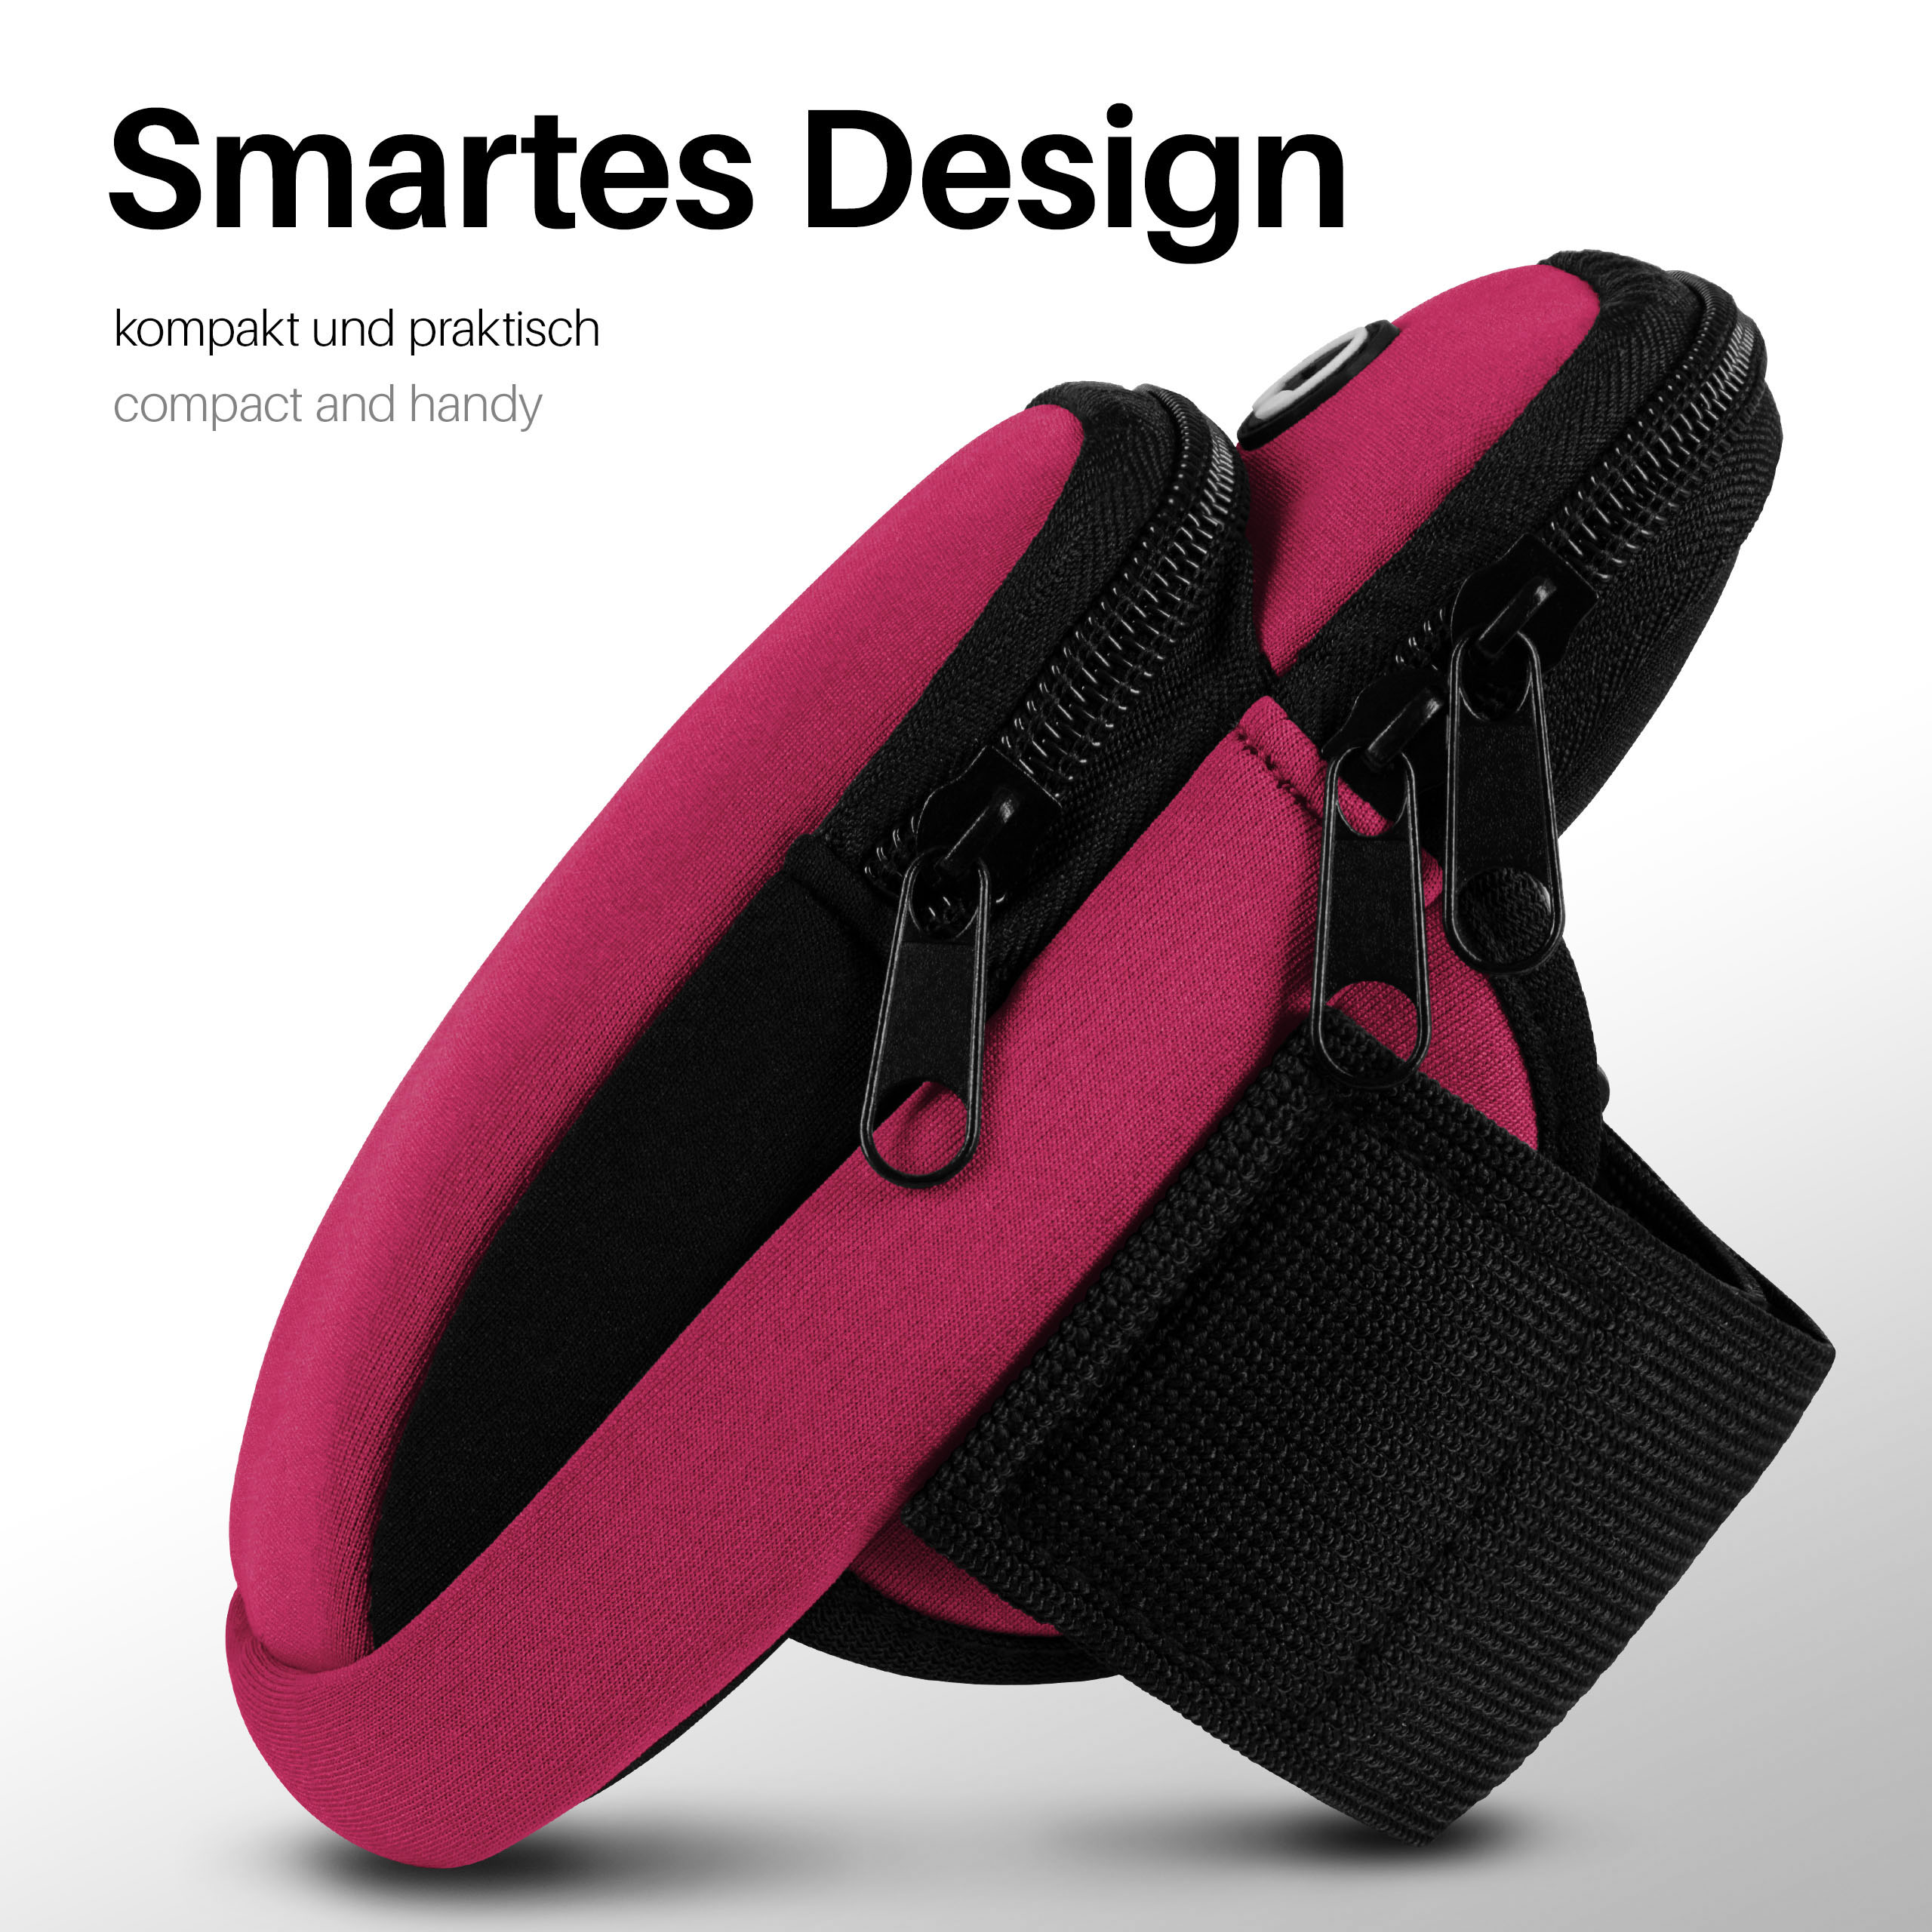 MOEX Sport 105 Cover, Full Pink Armband, (2019), Nokia